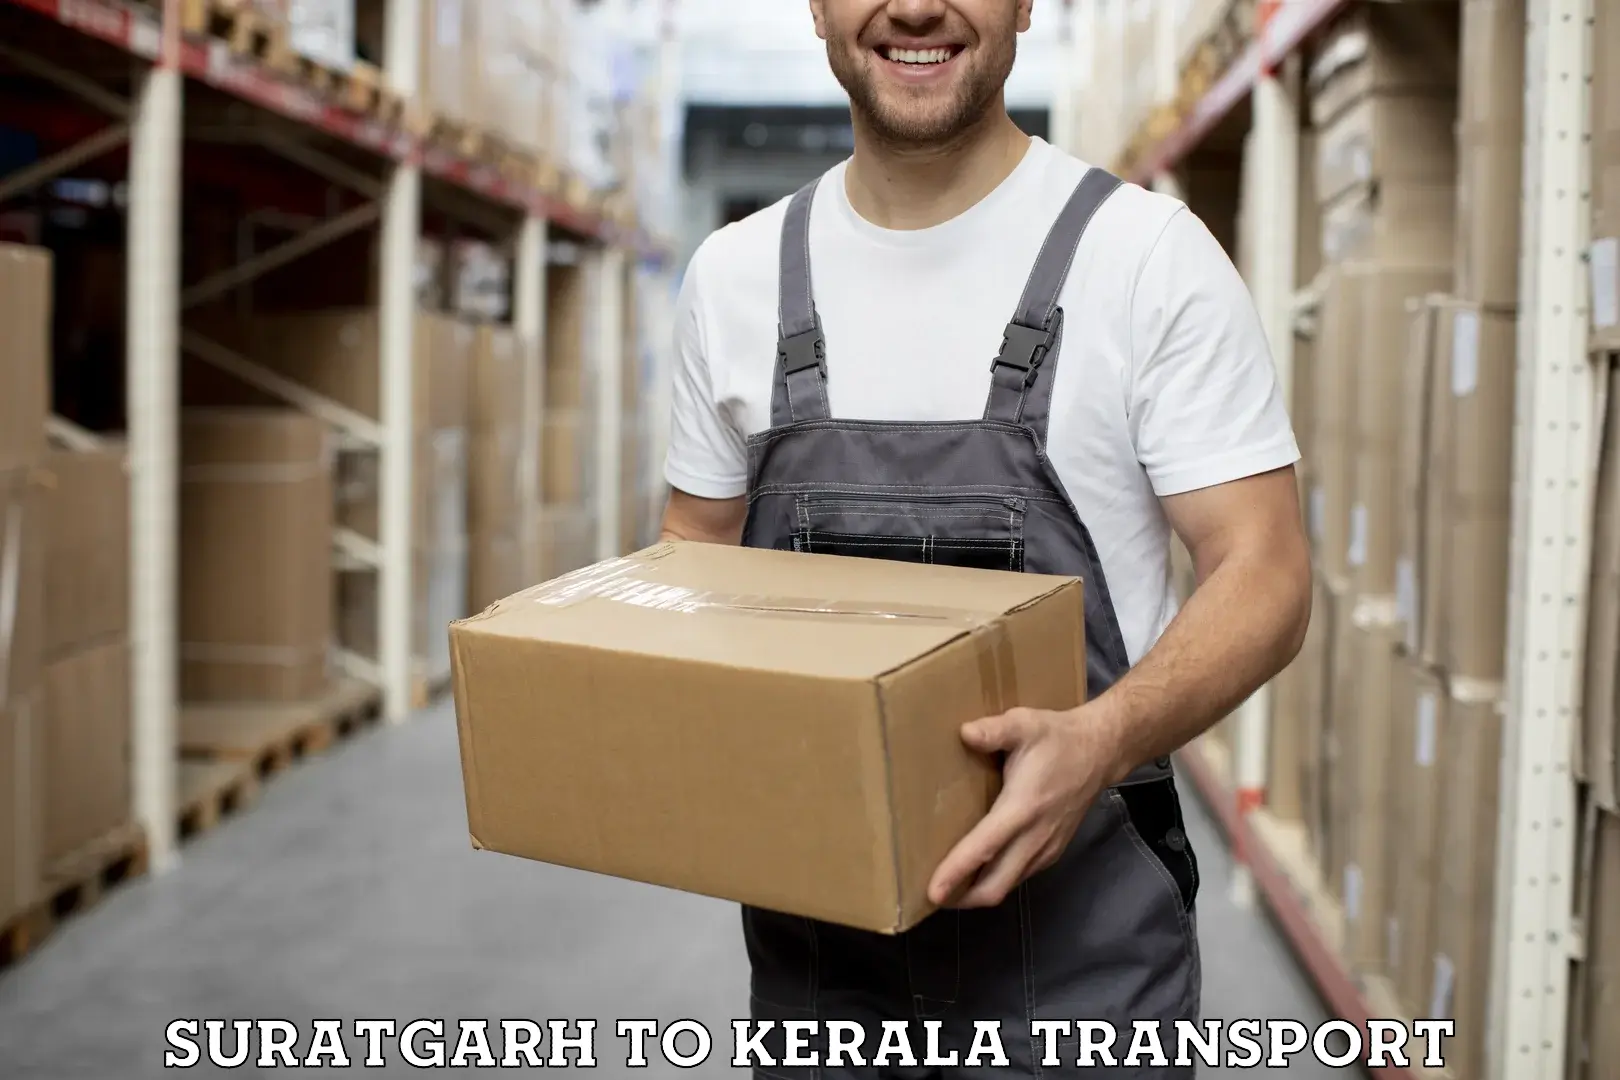 Delivery service Suratgarh to Cochin University of Science and Technology